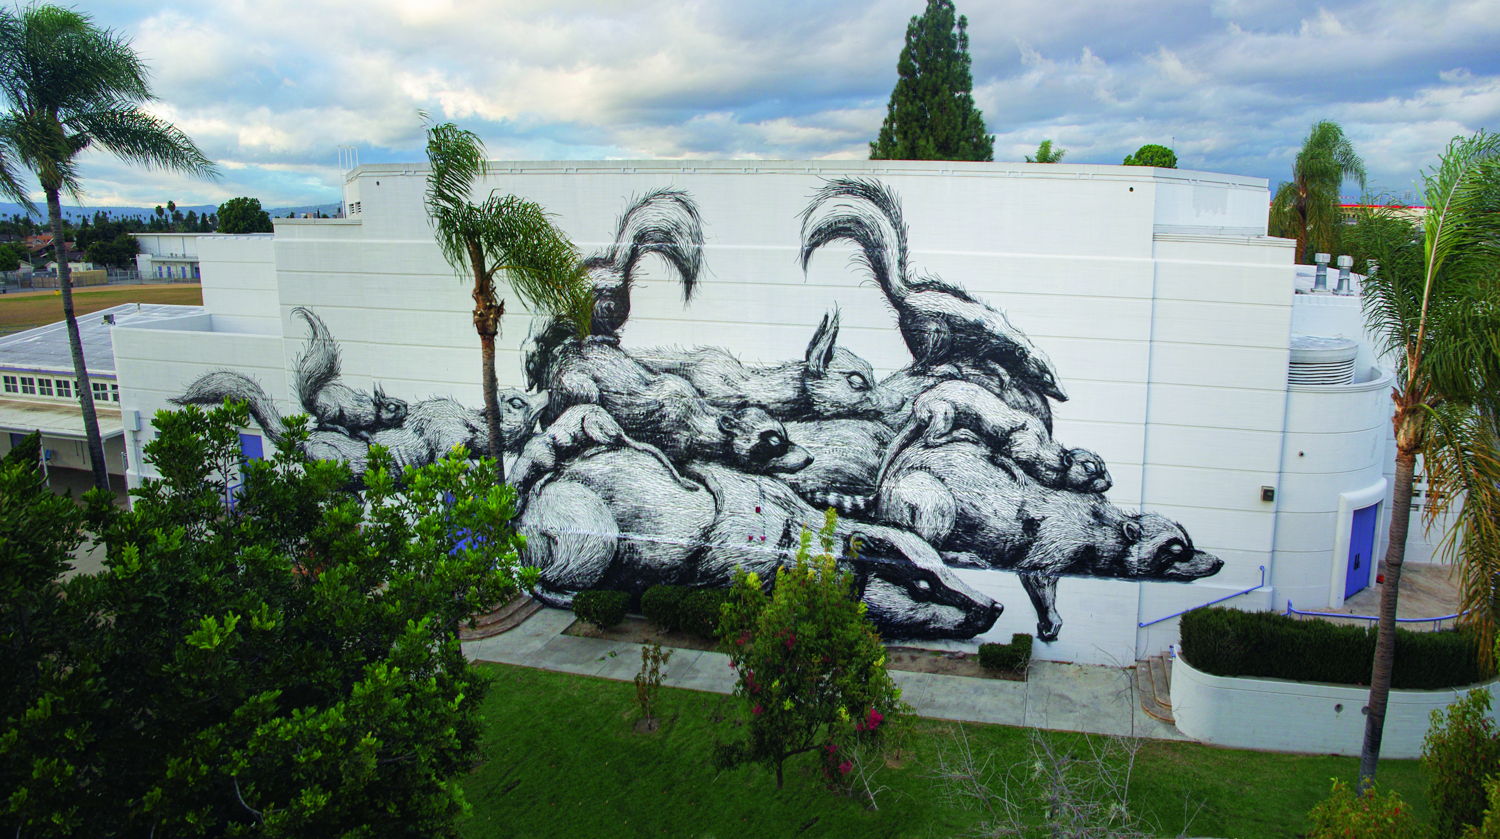 ROA-Los Angeles- manual Arts High School in South Central- photo credit by Alex Maloutas - Courtesy of the Artist.